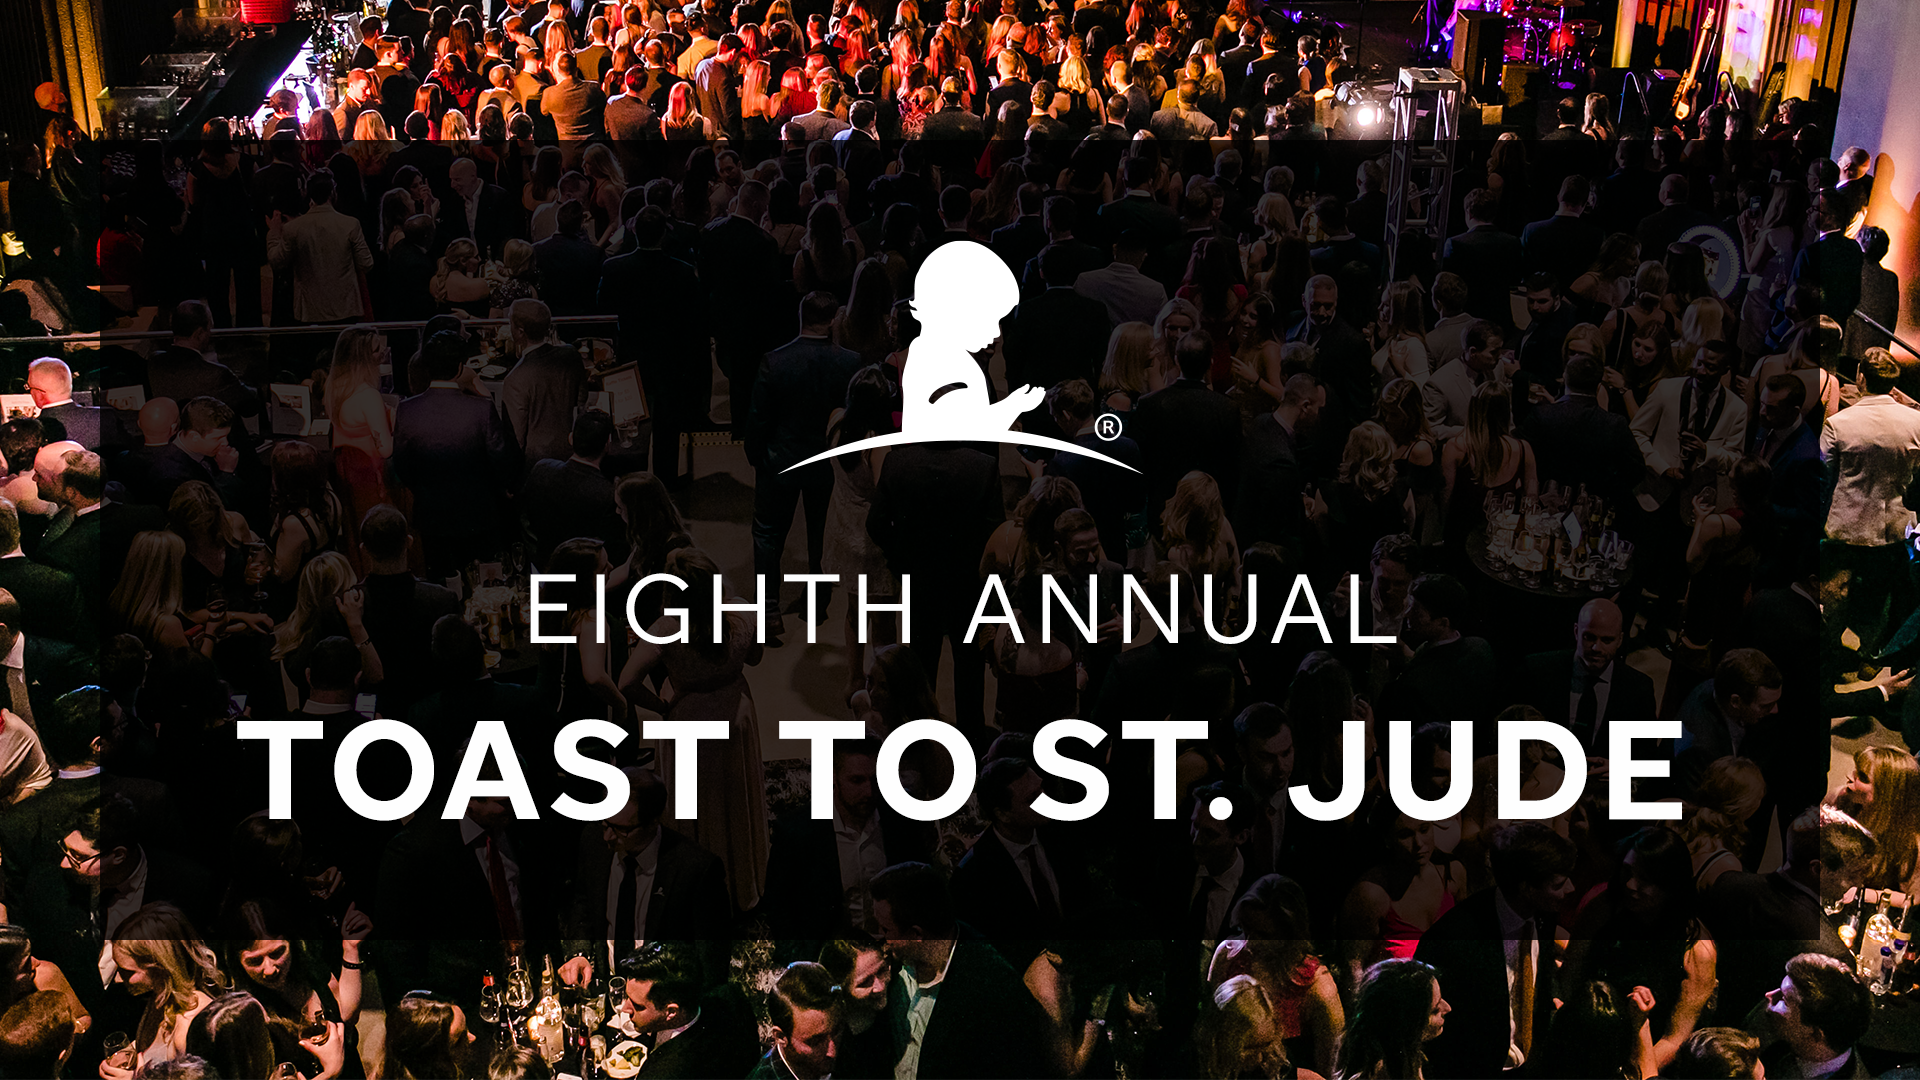 Why You Should Attend the Toast to St. Jude